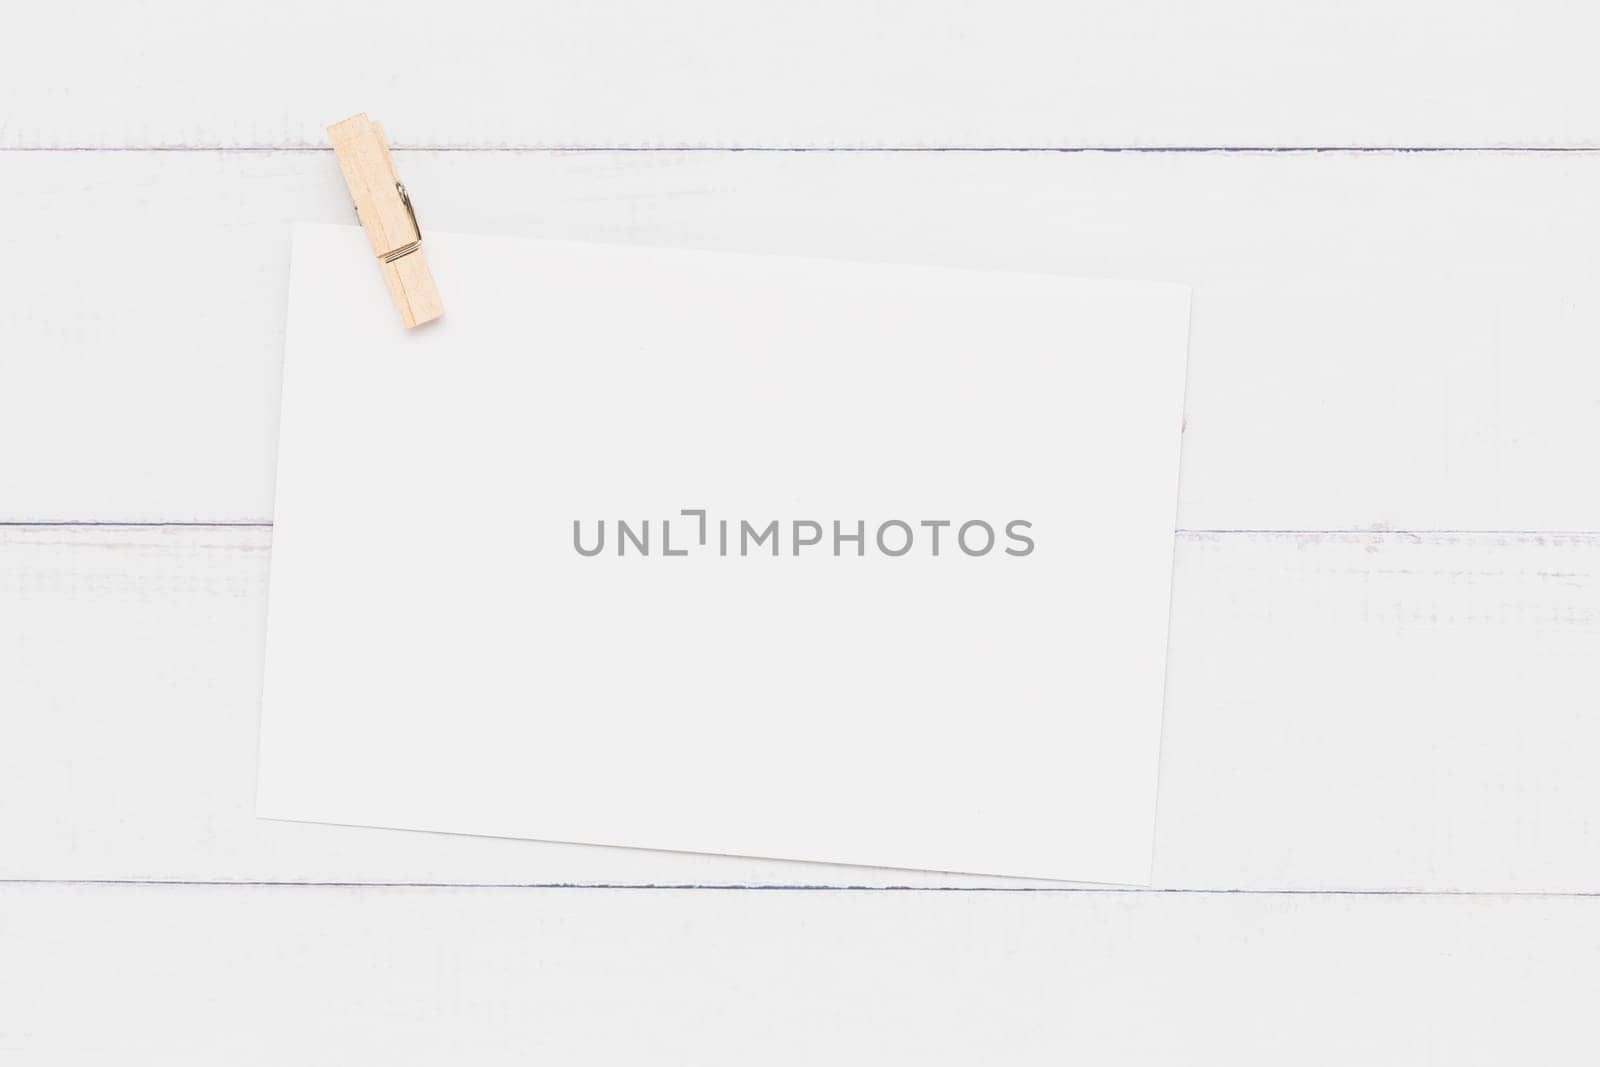 Blank white paper card with wooden clamp on white table background for wedding invitation card design and writing or printing on.